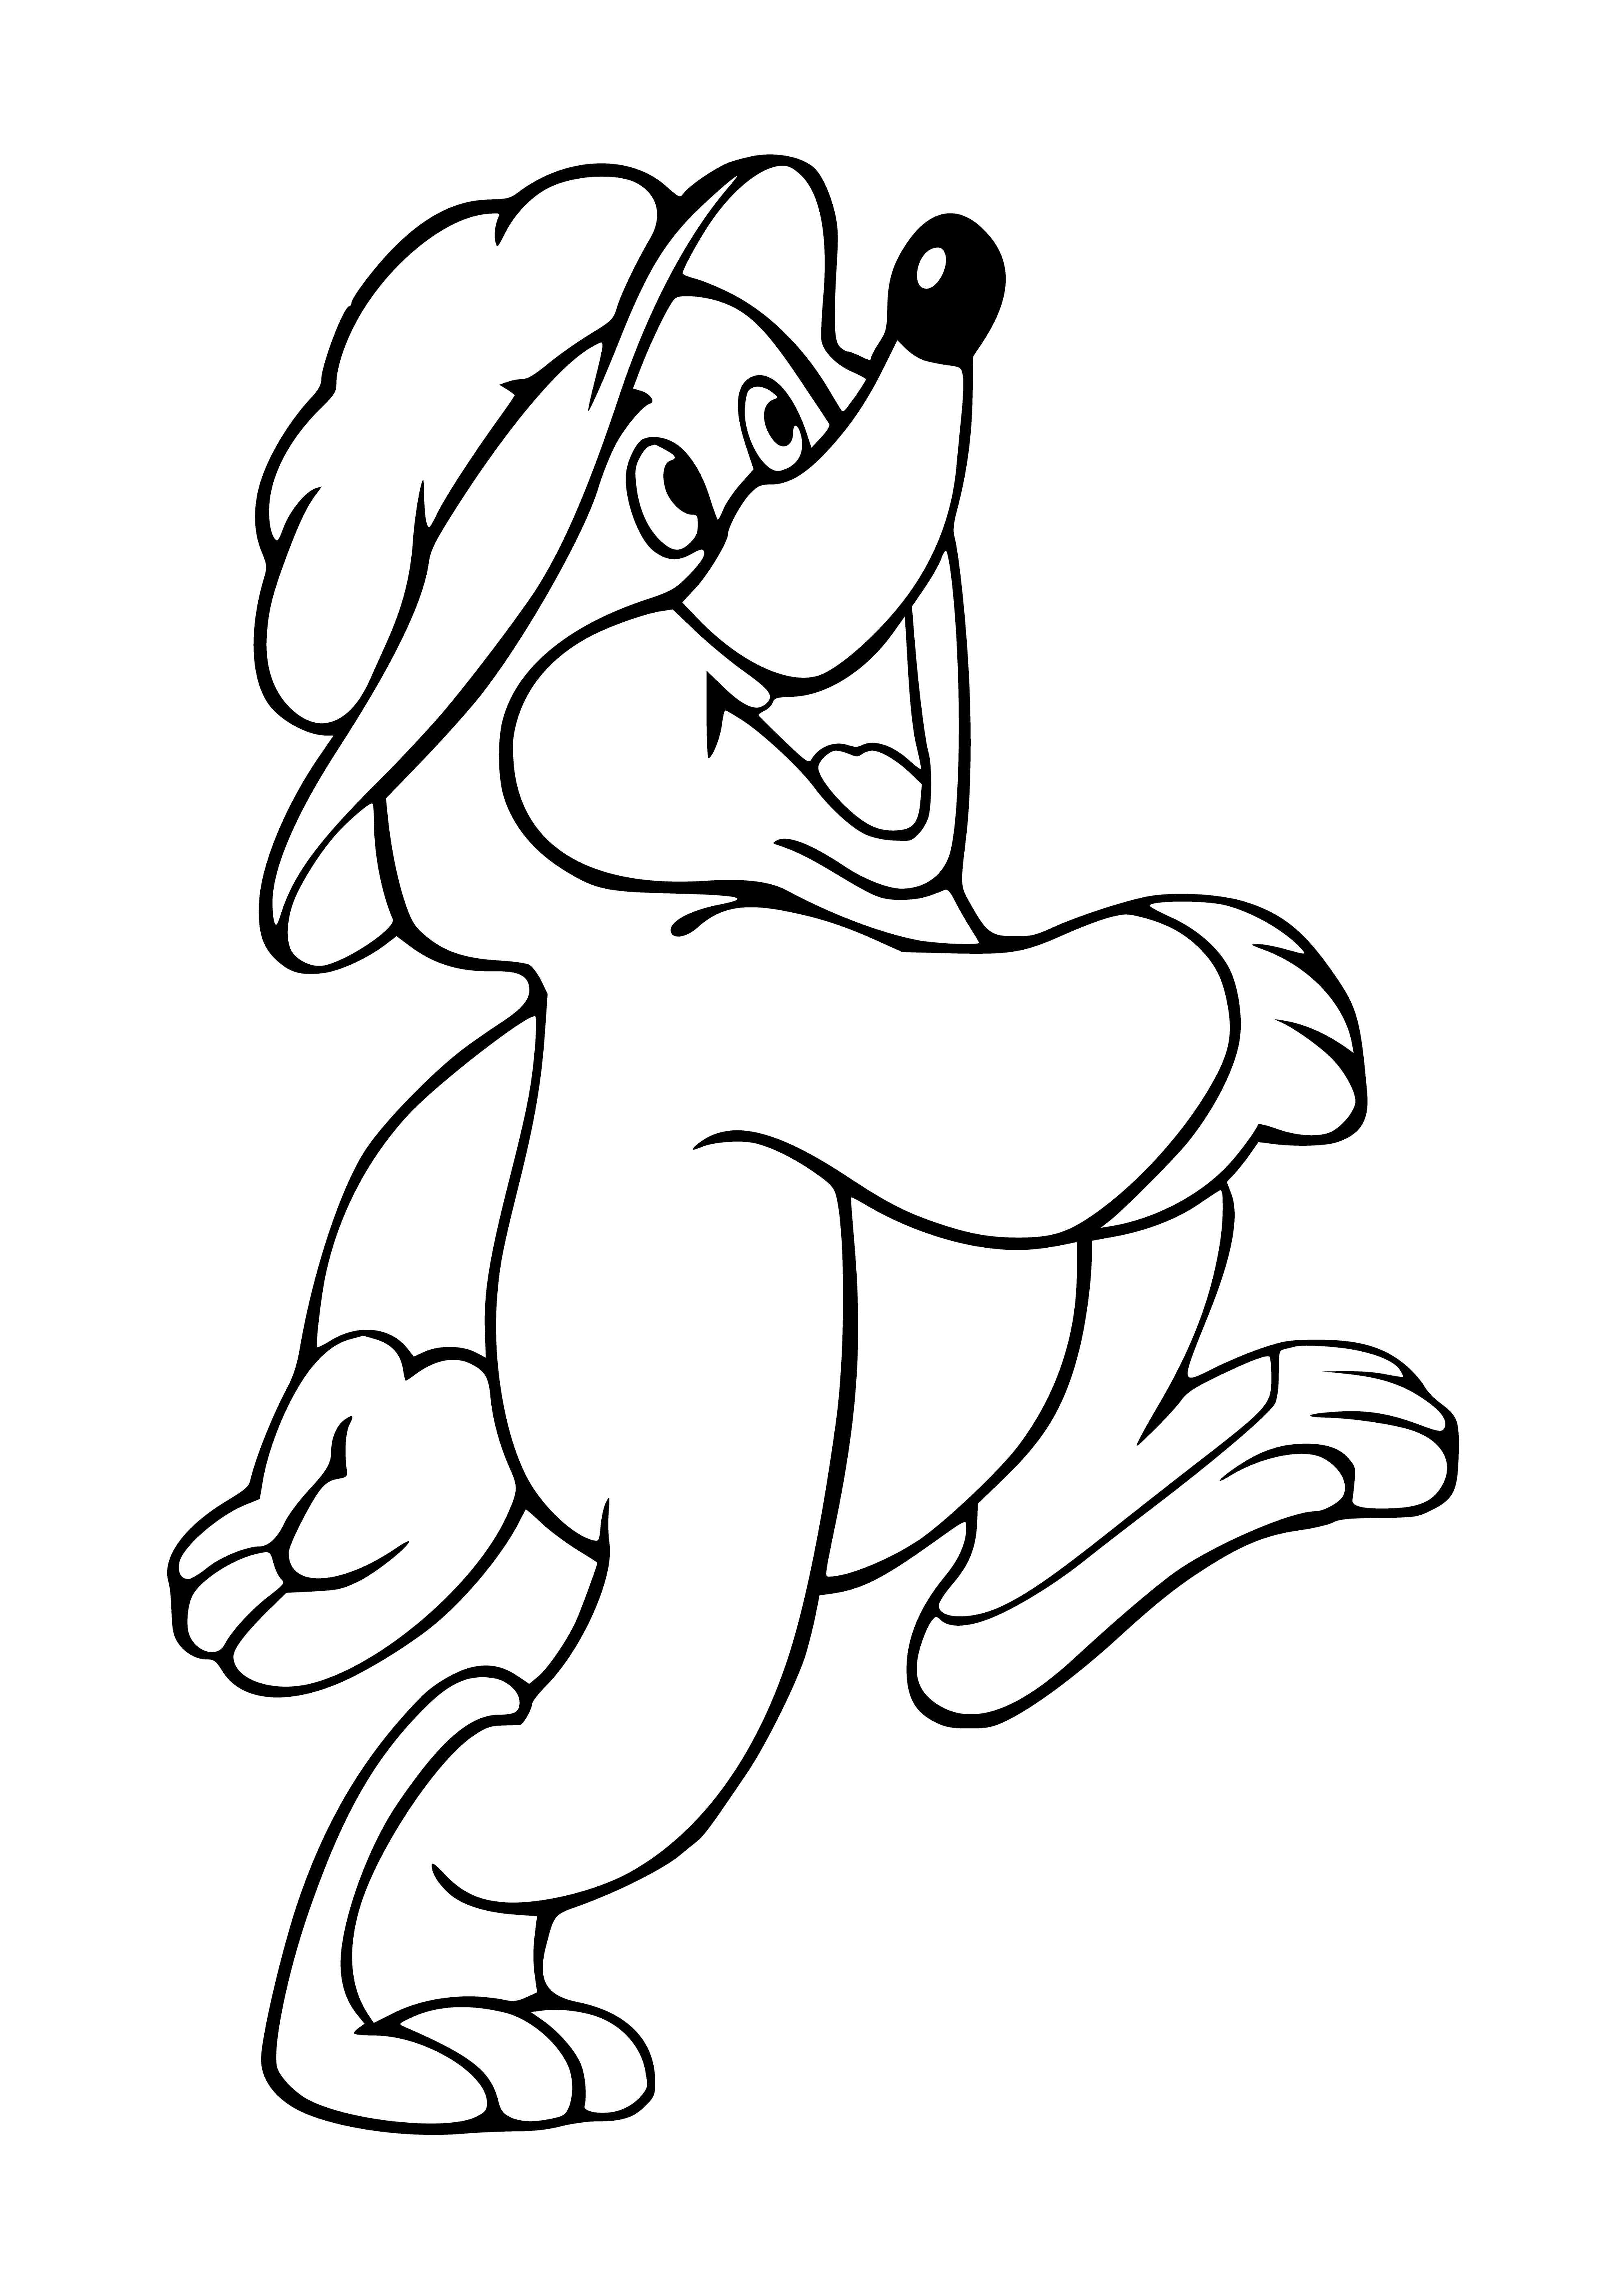 coloring page: Mole crawls beneath the clouds, feeling the warmth of the afternoon sun.

Mole crawls beneath the clouds, feeling the warmth of the sun's afternoon rays.